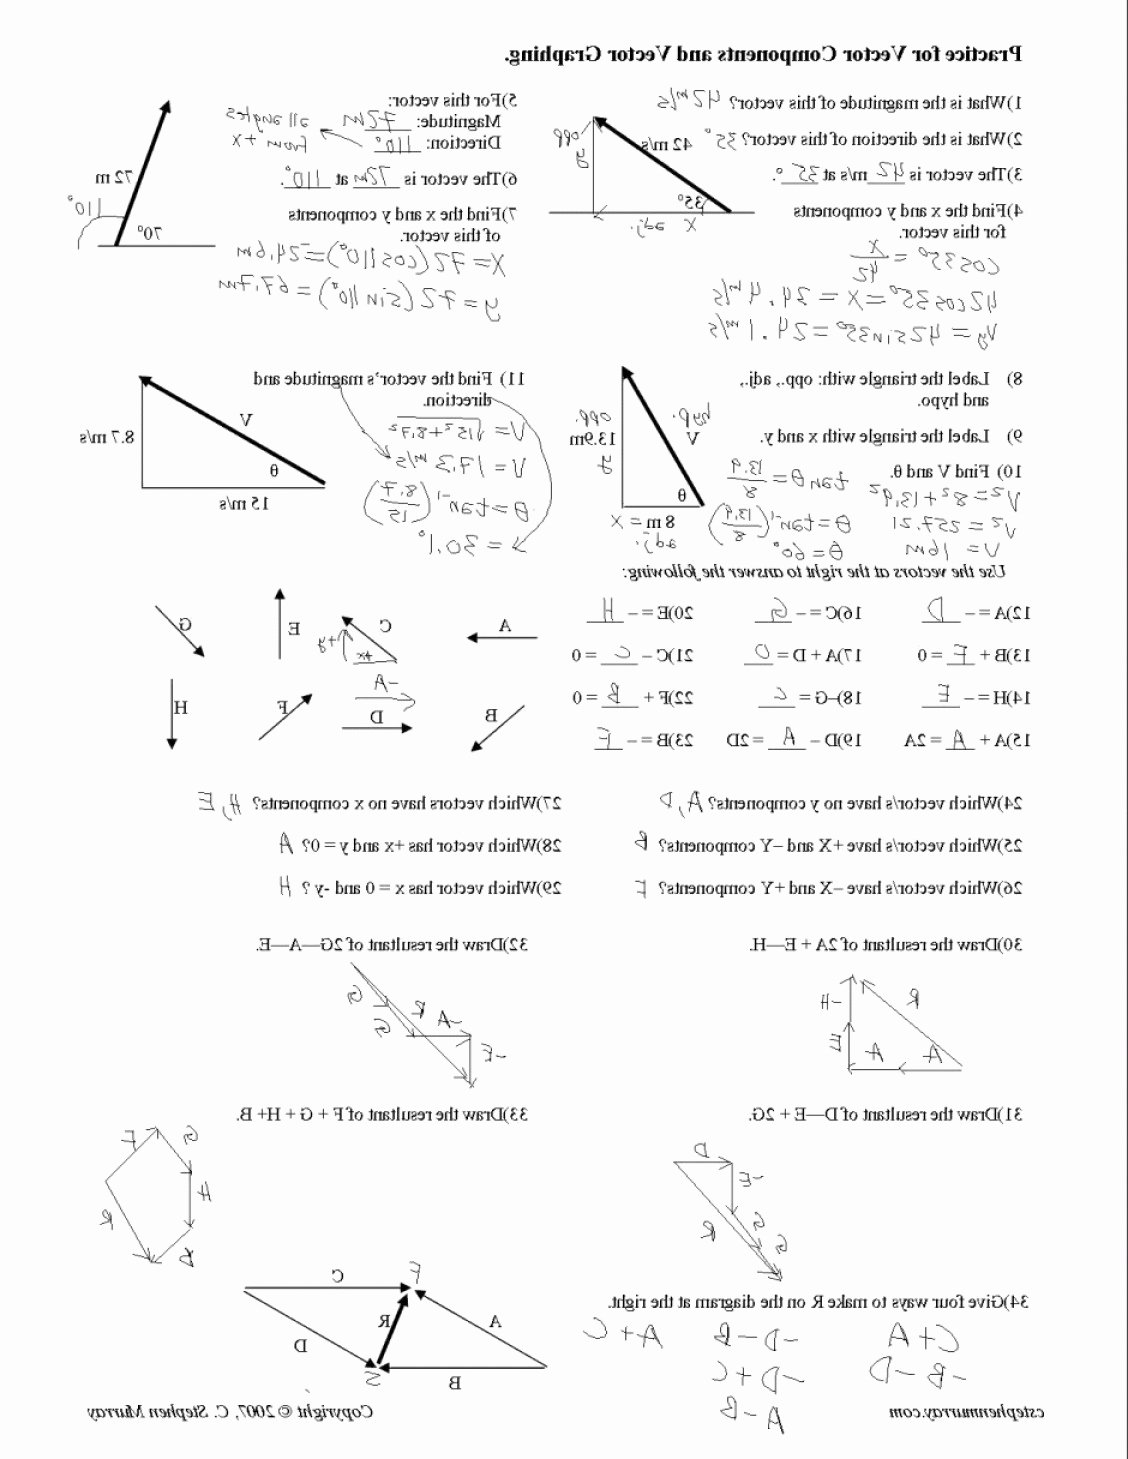 Vector Addition Worksheet with Answers Luxury Vector Precalculus Review